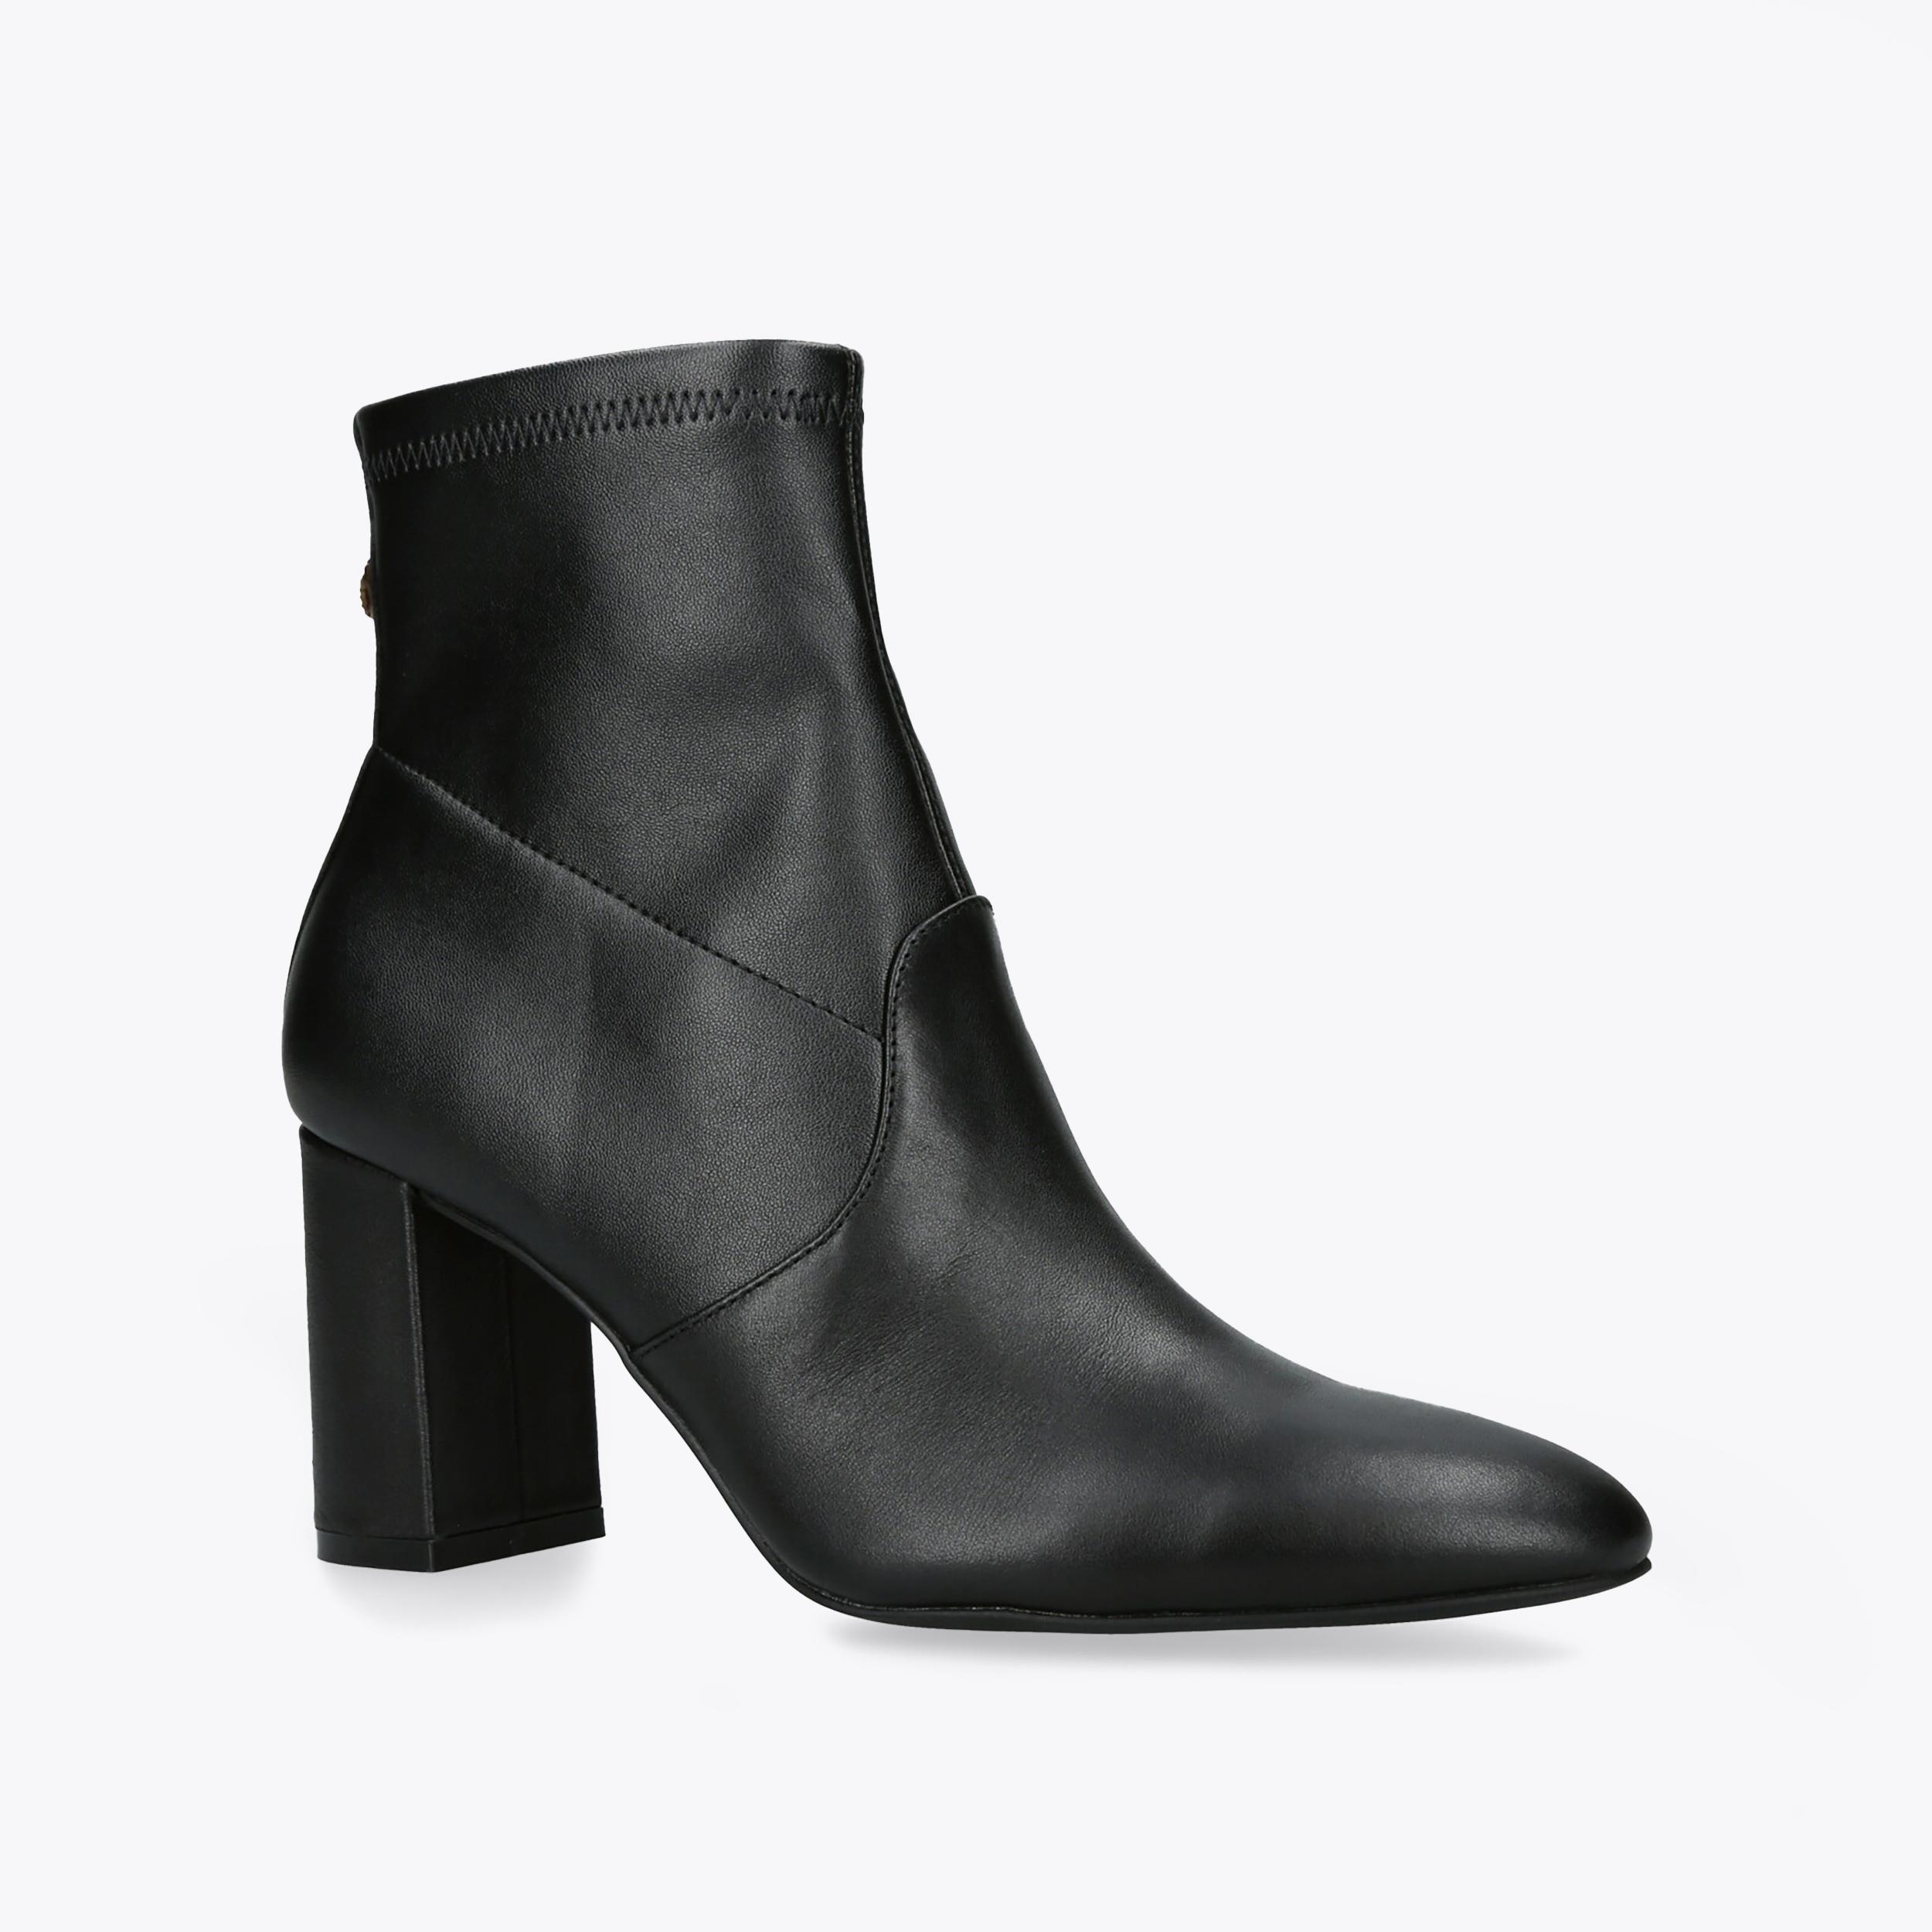 LANGLEY 80 ANKLE BOOT Black Leather Boots by KURT GEIGER LONDON